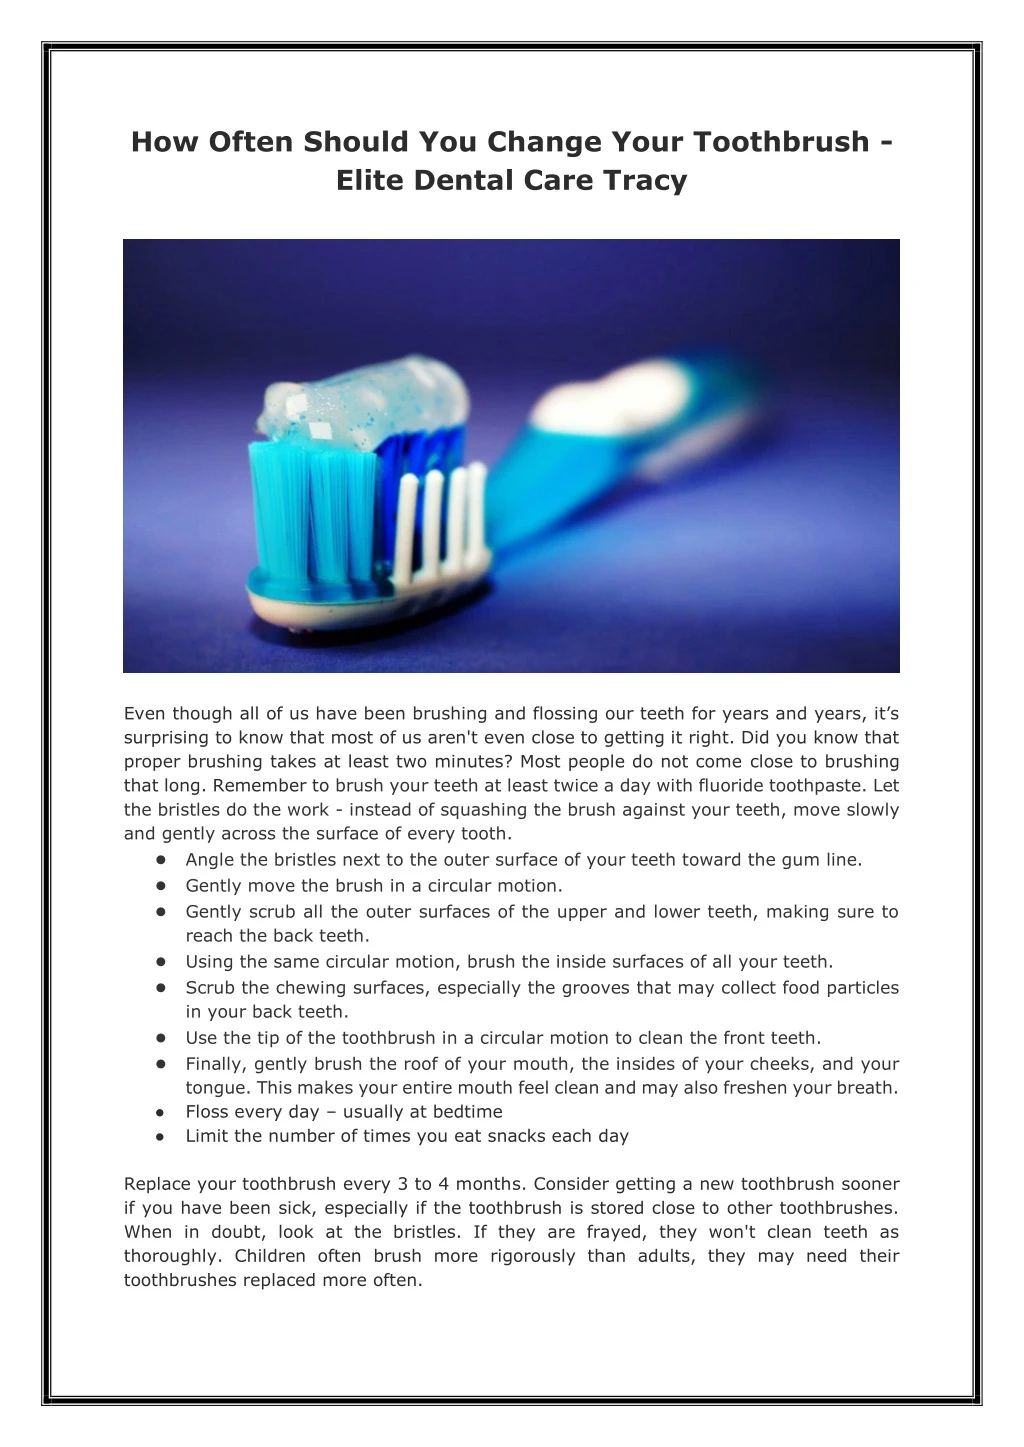 how often should you change your toothbrush elite